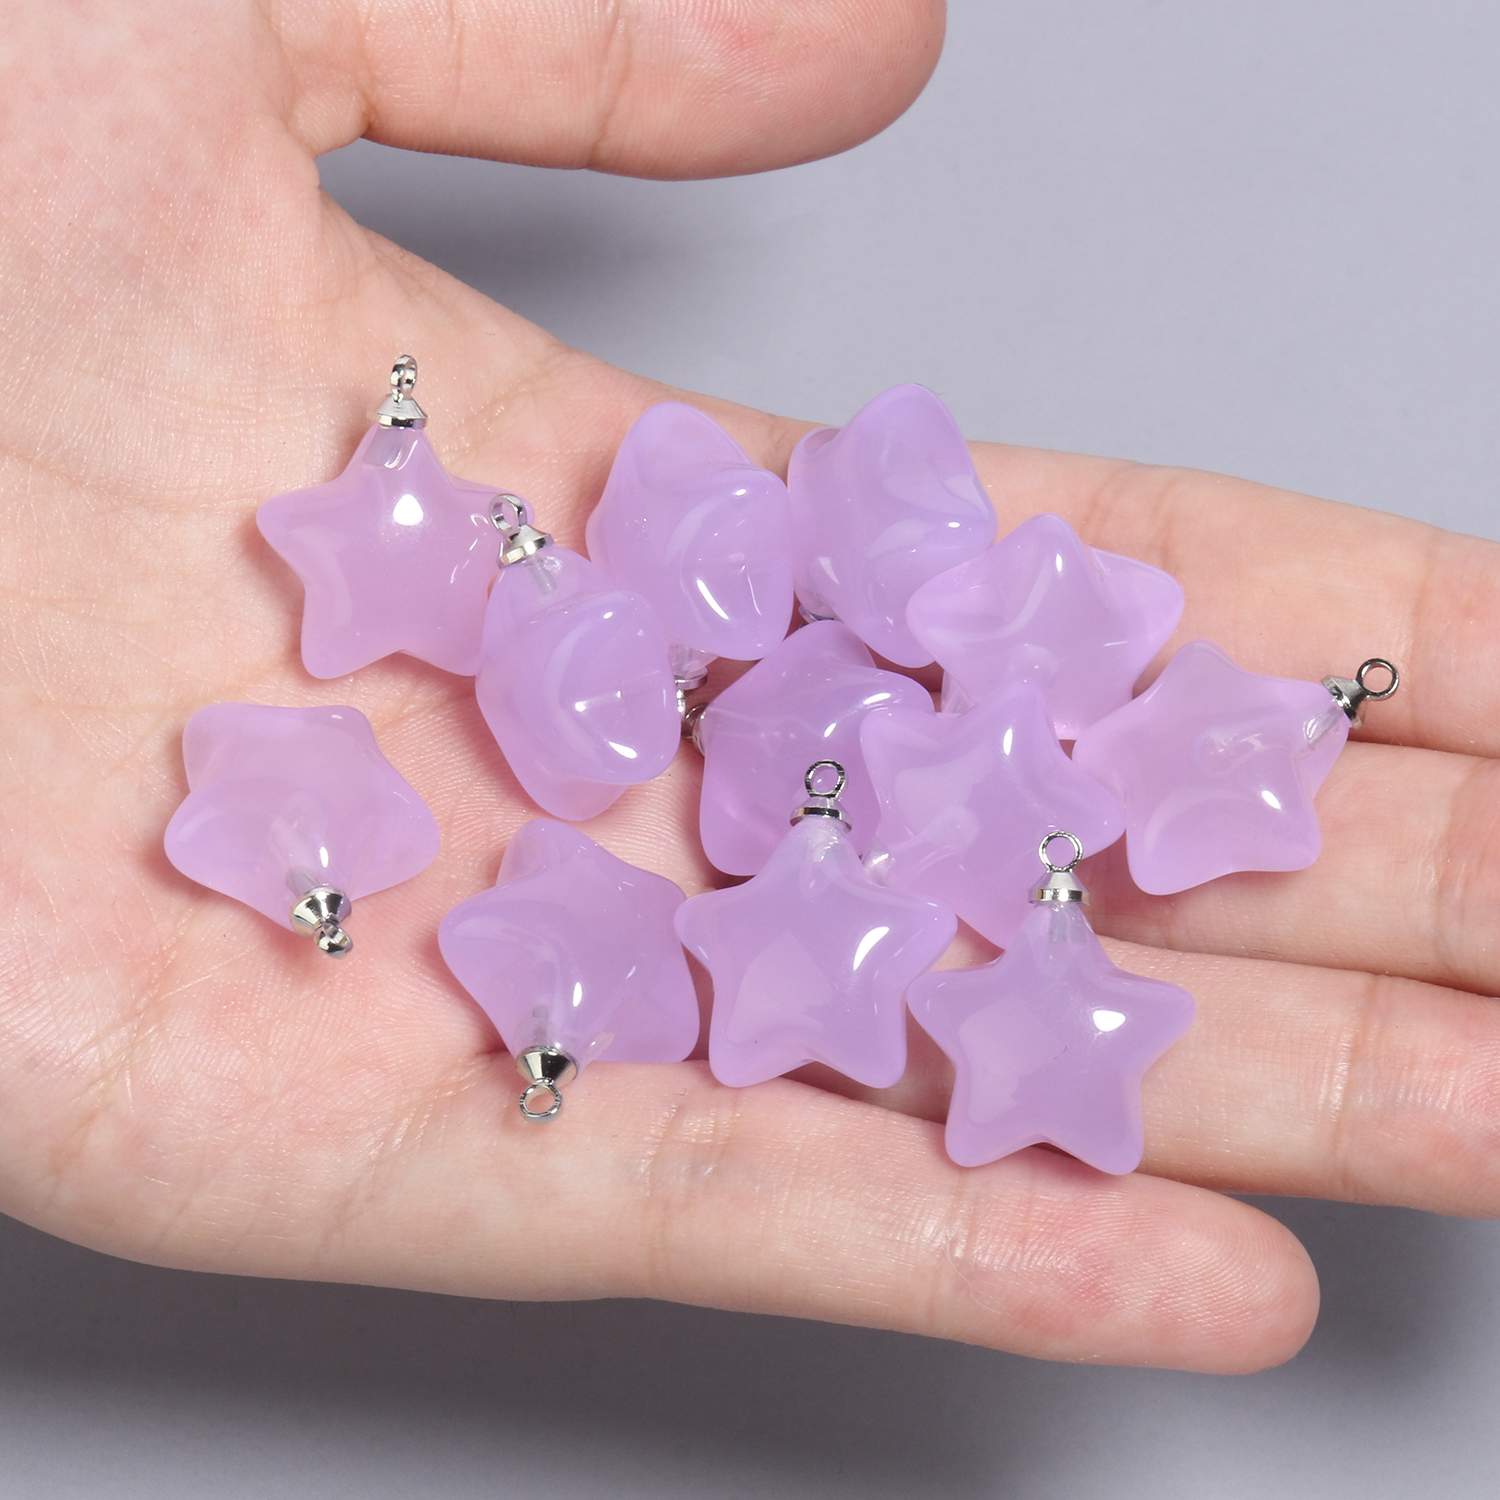 COGCHARGER Luminous Resin Charms Glow in the Dark Cute Charms for Bracelets  Necklace Earrings Jewelry Making DIY Ornament Accessories